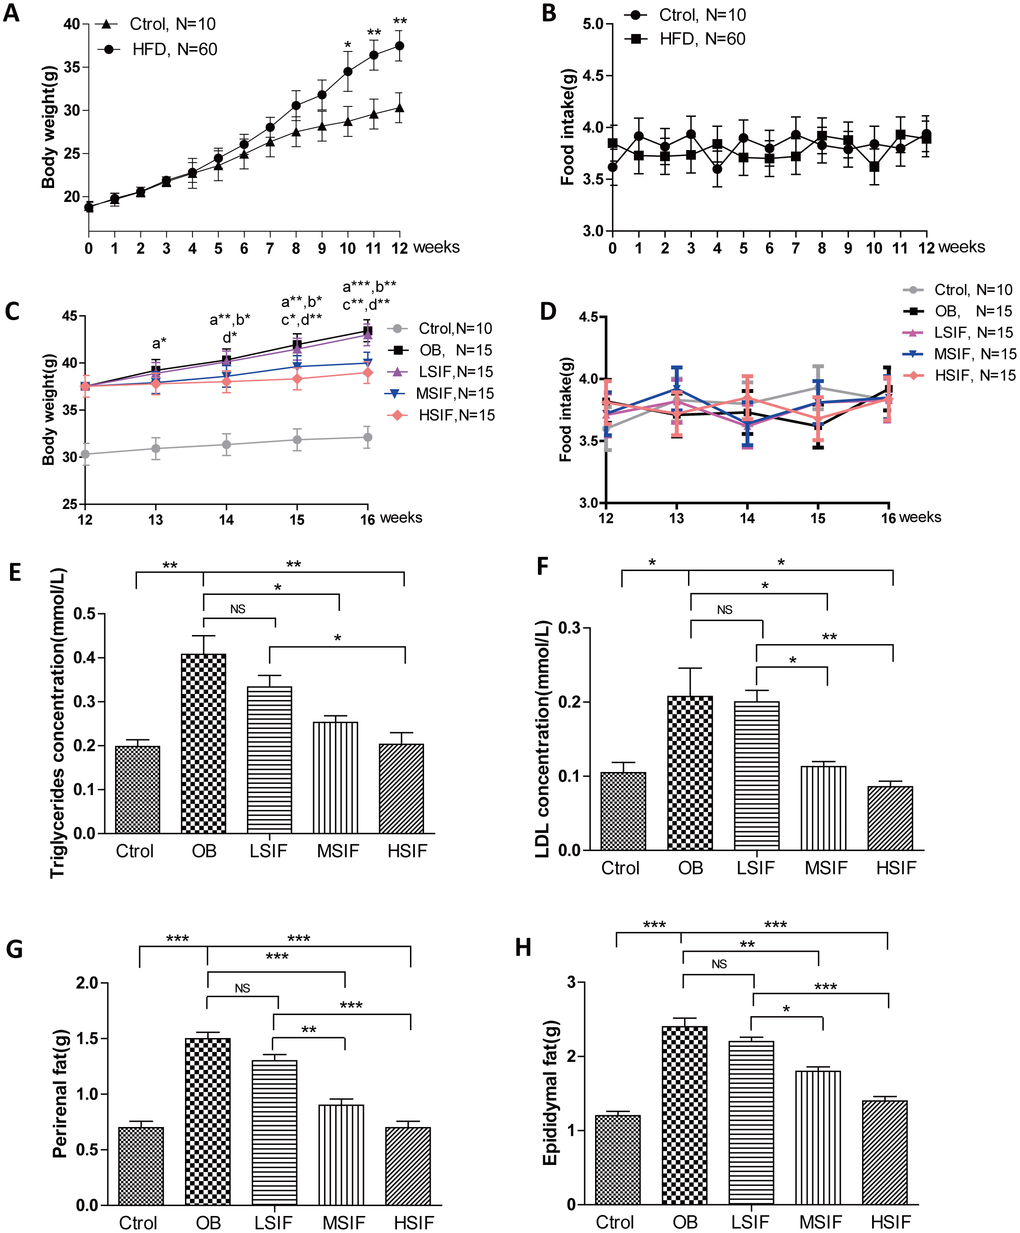 Soy isoflavones reduce the body weight, the plasma TG and LDL concentrations as well as visceral fat weights in DIO male mice. (A) Quantification shows the body weight of mice fed with basal diets and high fat diets; (B) Quantification shows no difference in food intake of mice fed with basal diets and high fat diets; (C) Quantification shows the body weight trend of DIO mice fed with basal diets and the addition with different doses of soy isoflavones. a: HSIF vs. OB; b:MSIF vs. OB. c: LSIF vs. MSIF; d: LSIF vs. HSIF. (D) Quantification shows the food intake trend of DIO mice fed with basal diets and the addition with different doses of soy isoflavones. (E) Quantification shows the triglycerides concentration of DIO mice feed with basal diets and the addition with different doses of soy isoflavones; (F) Quantification shows the LDL concentration of DIO mice fed with basal diets and the addition with different doses of soy isoflavones. (G) Quantification shows the perirenal fat weight of DIO mice fed with basal diets and the addition with different doses of soy isoflavones; (H) Quantification shows the epididymal fat weight of DIO mice fed with basal diets and the addition with different doses of soy isoflavones. ns, no statistical significance, * p 